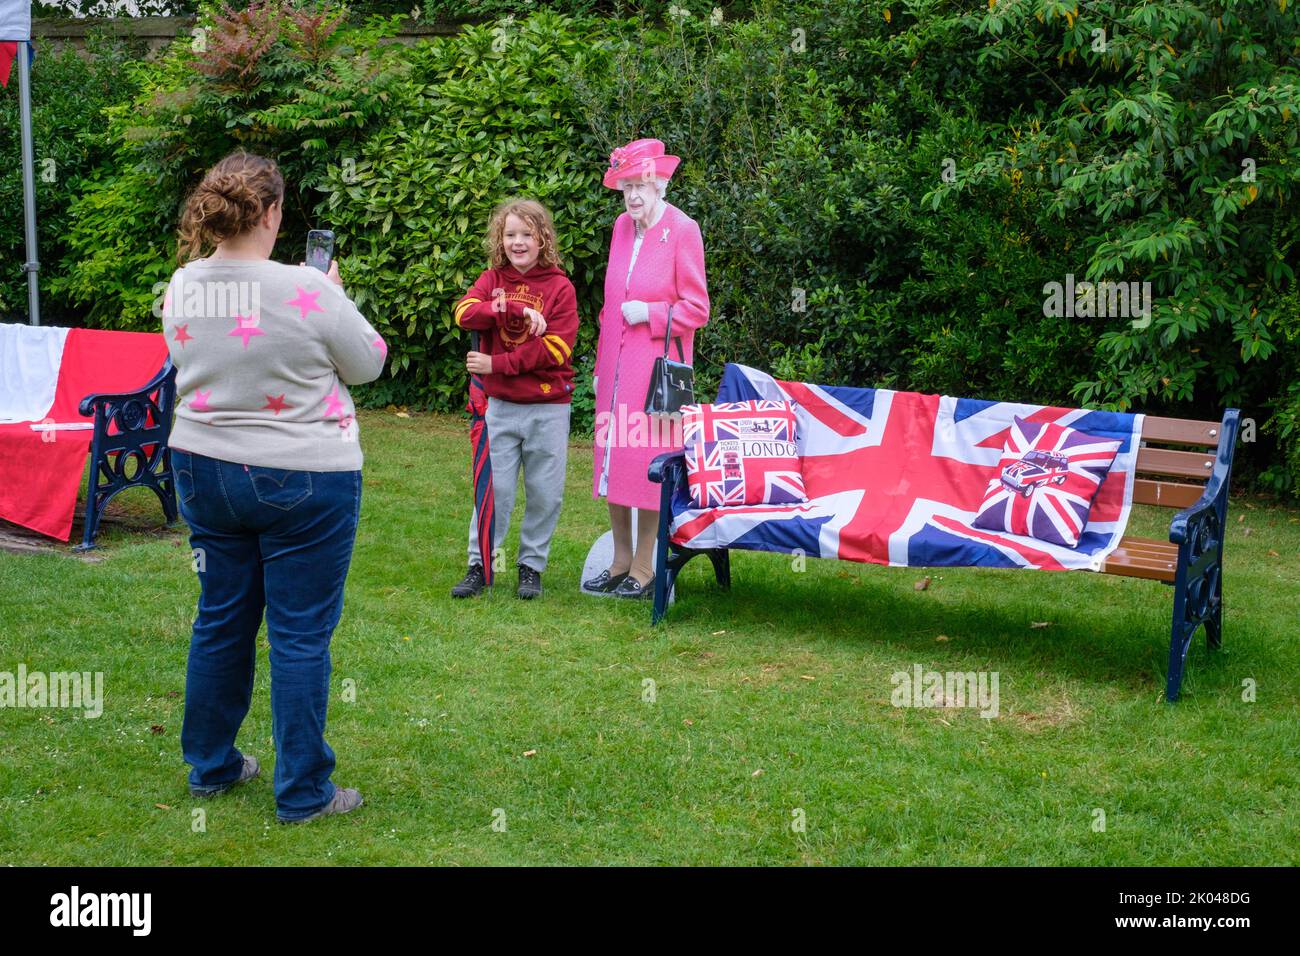 A mother photographs her young daughter beside a lifesize cardboard cut-out of Her Majesty Queen Elizabeth II at a Platinum Jubilee party Stock Photo